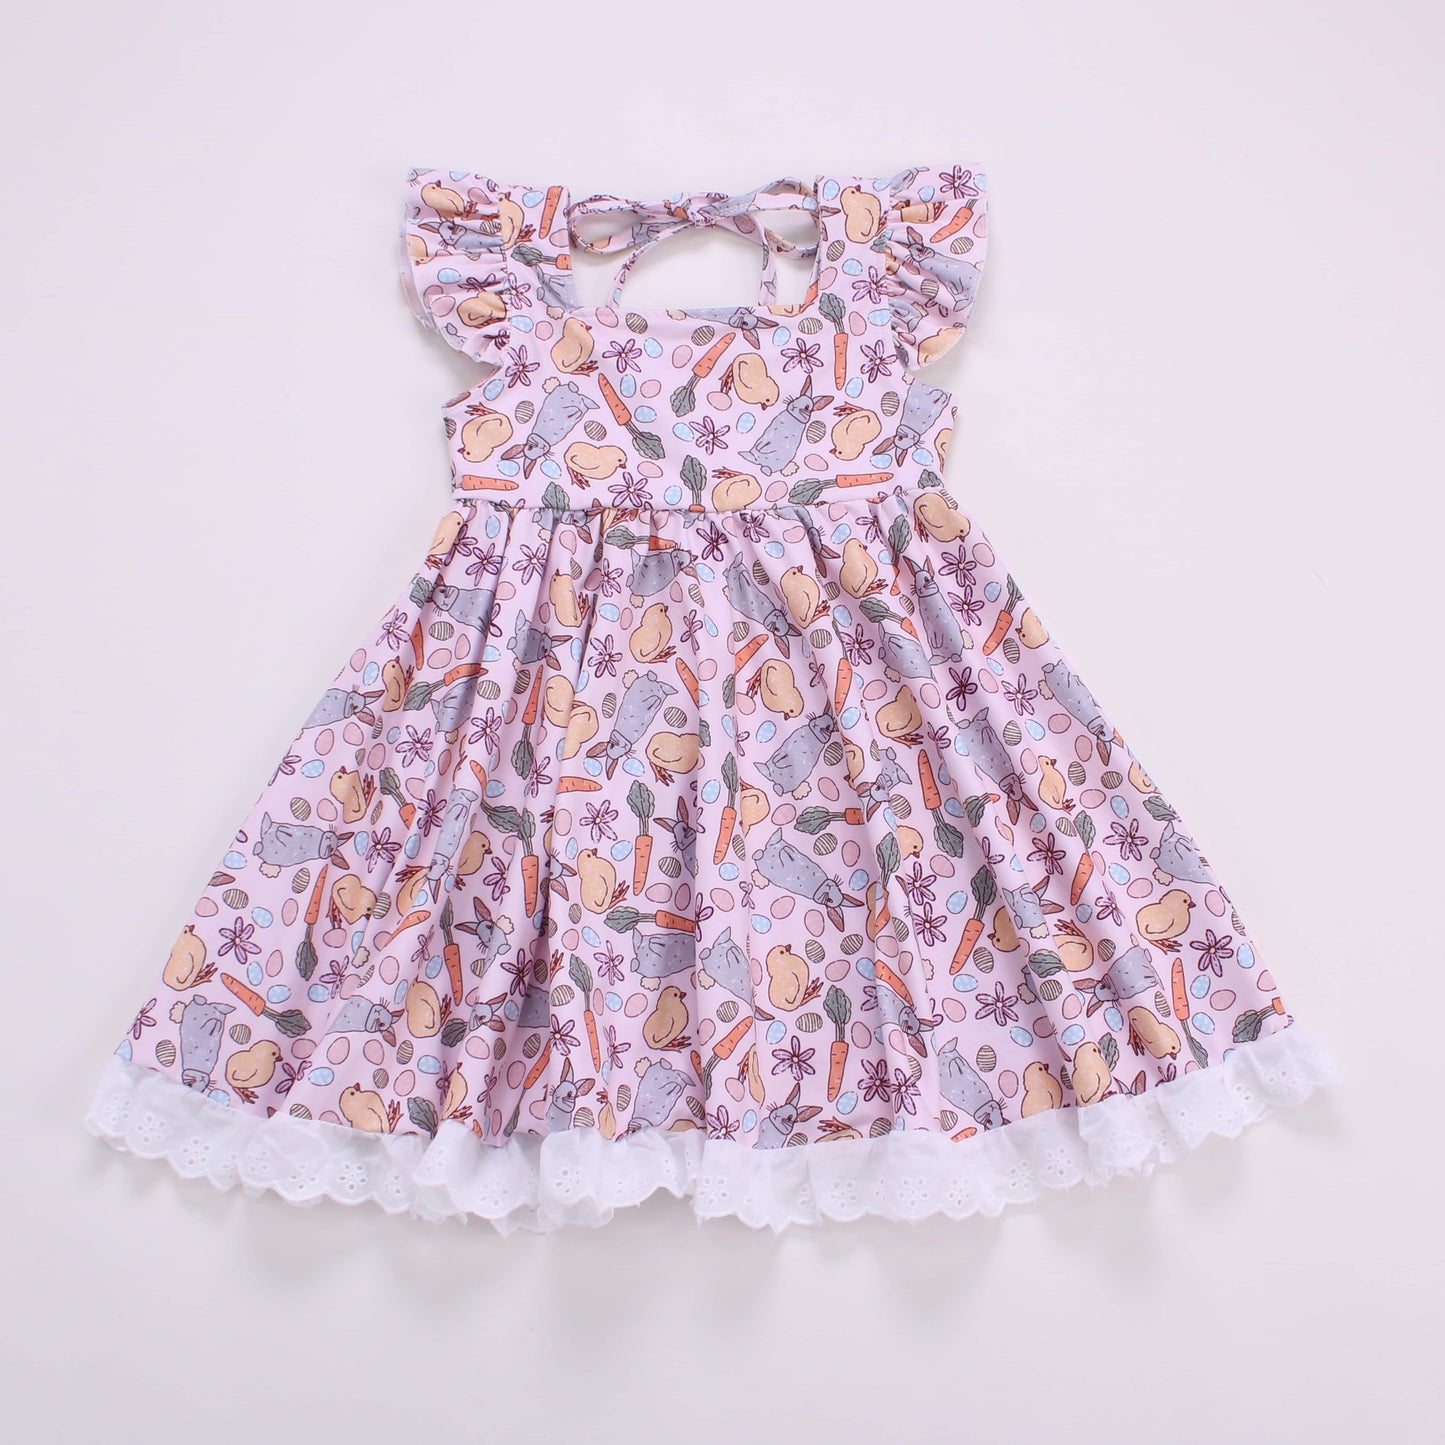 Bunnies and Chicks Lace Dress